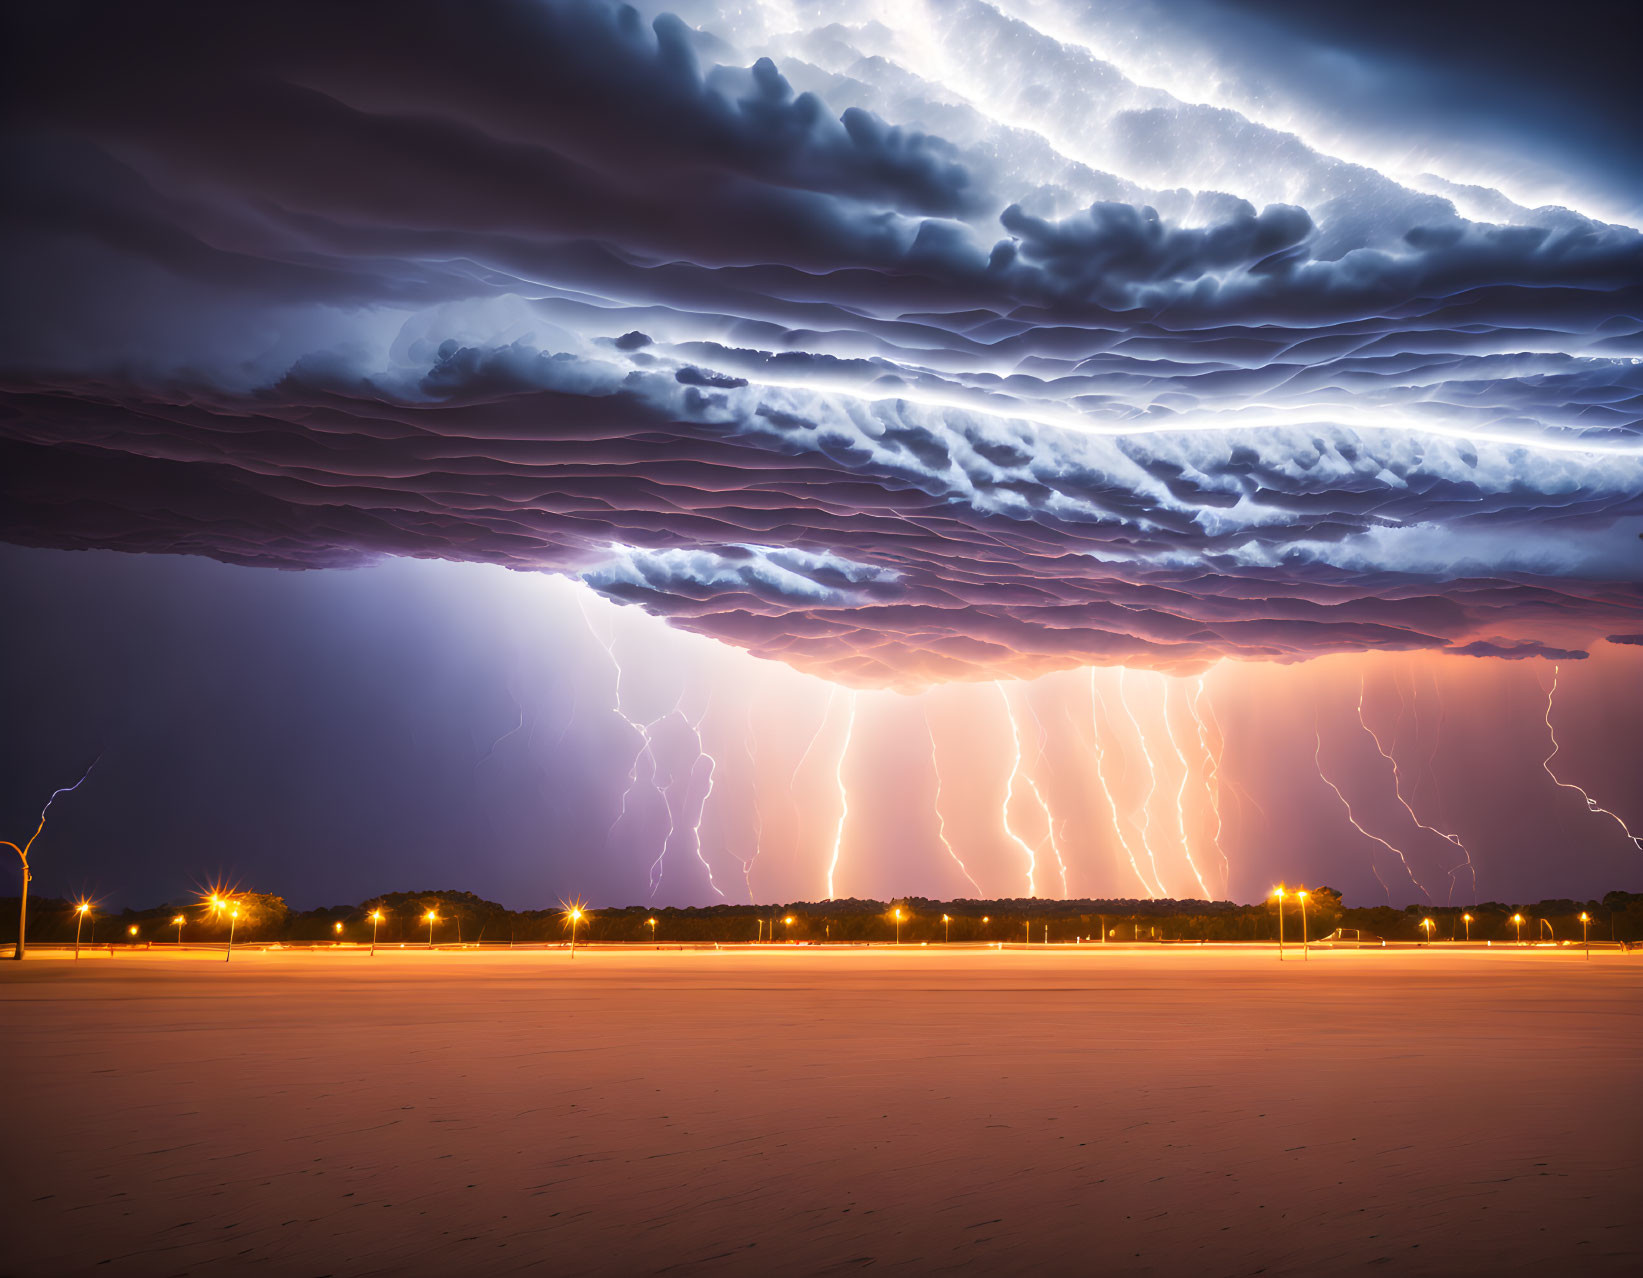 Dramatic thunderstorm scene with lightning strikes and dark cloud formation